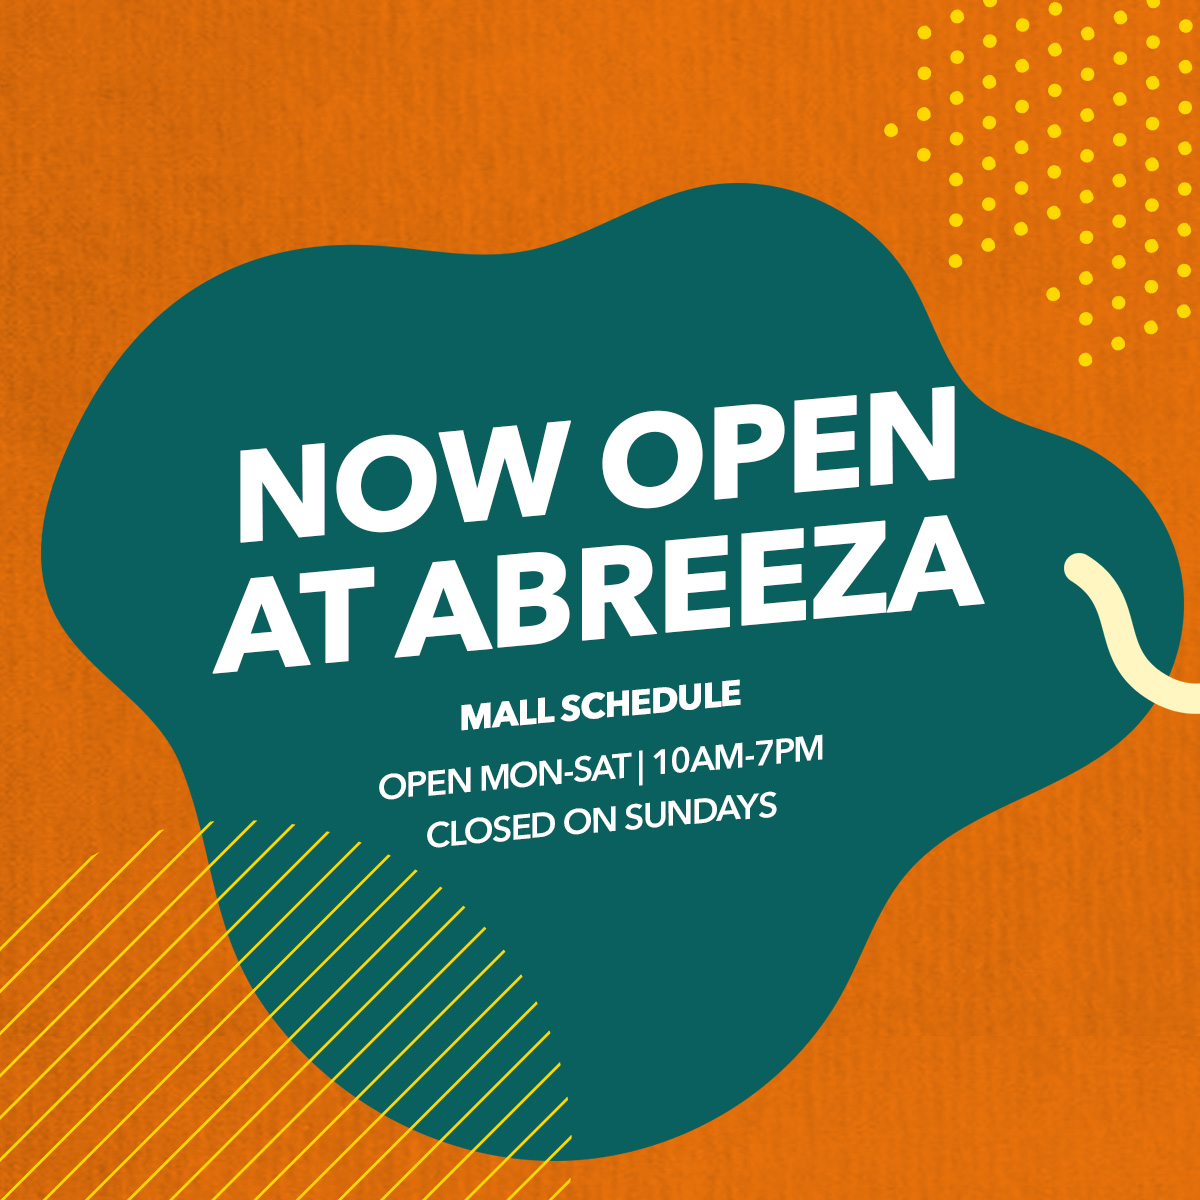 Ayala Malls Abreeza on X: Shop for your new normal essentials at